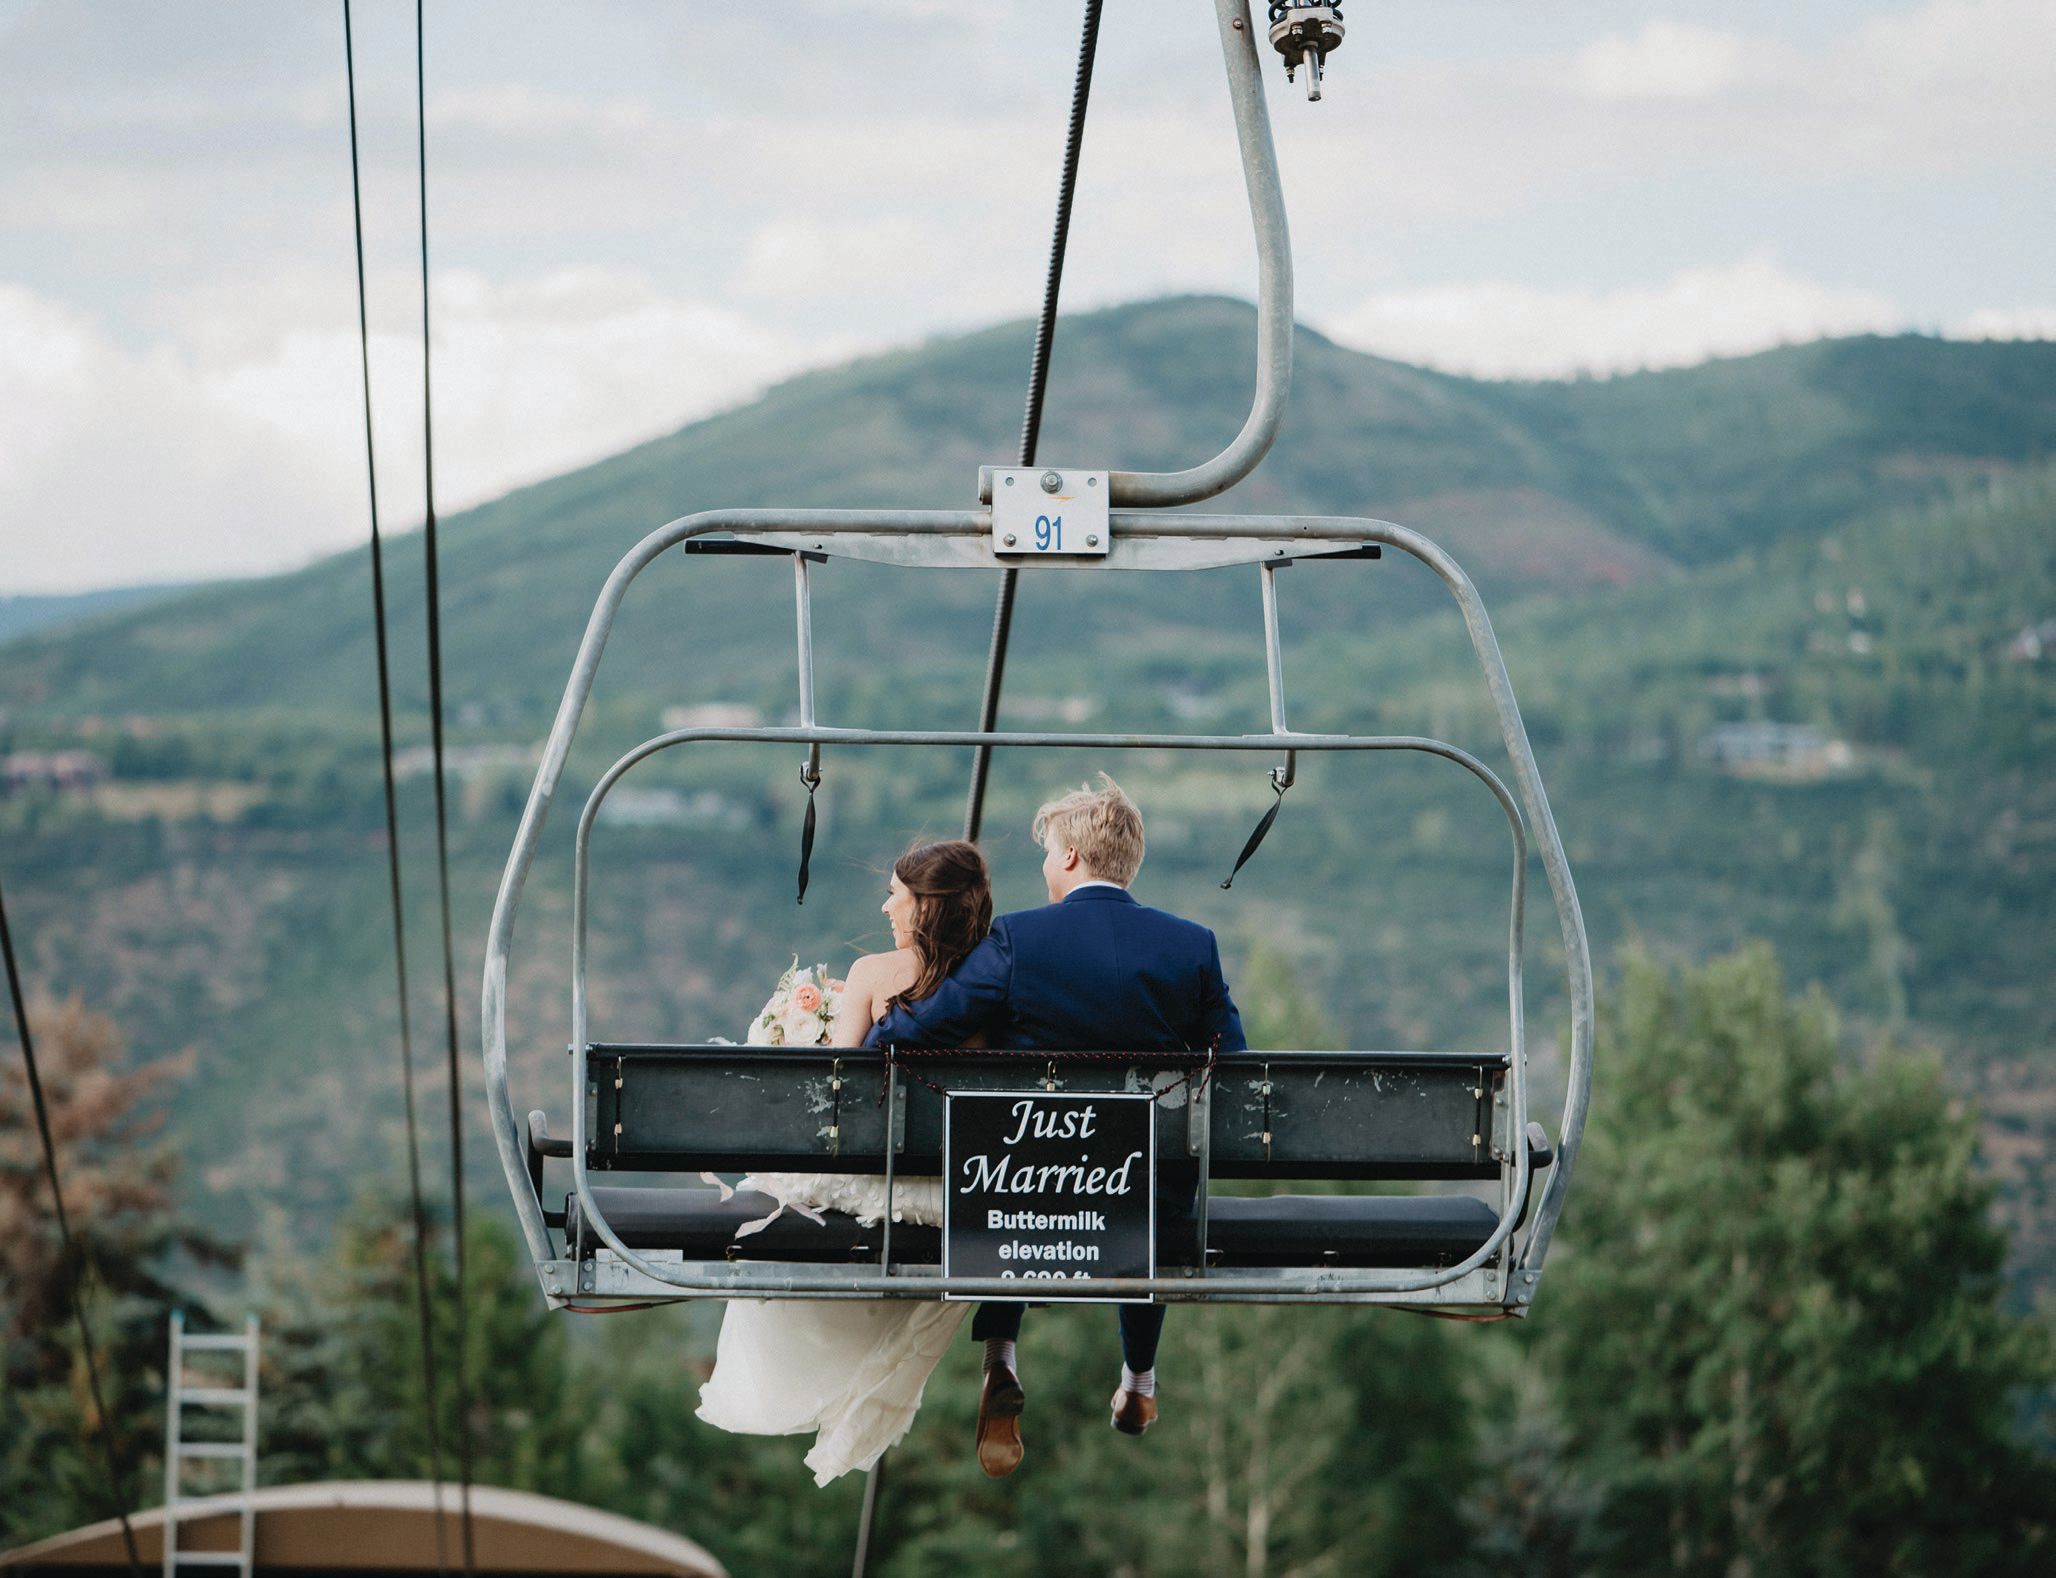 The ultimate wedding sendoff? A chairlift ride down to Buttermilk Mountain Lodge. PHOTO COURTESY OF BE THE EXPERIENCE